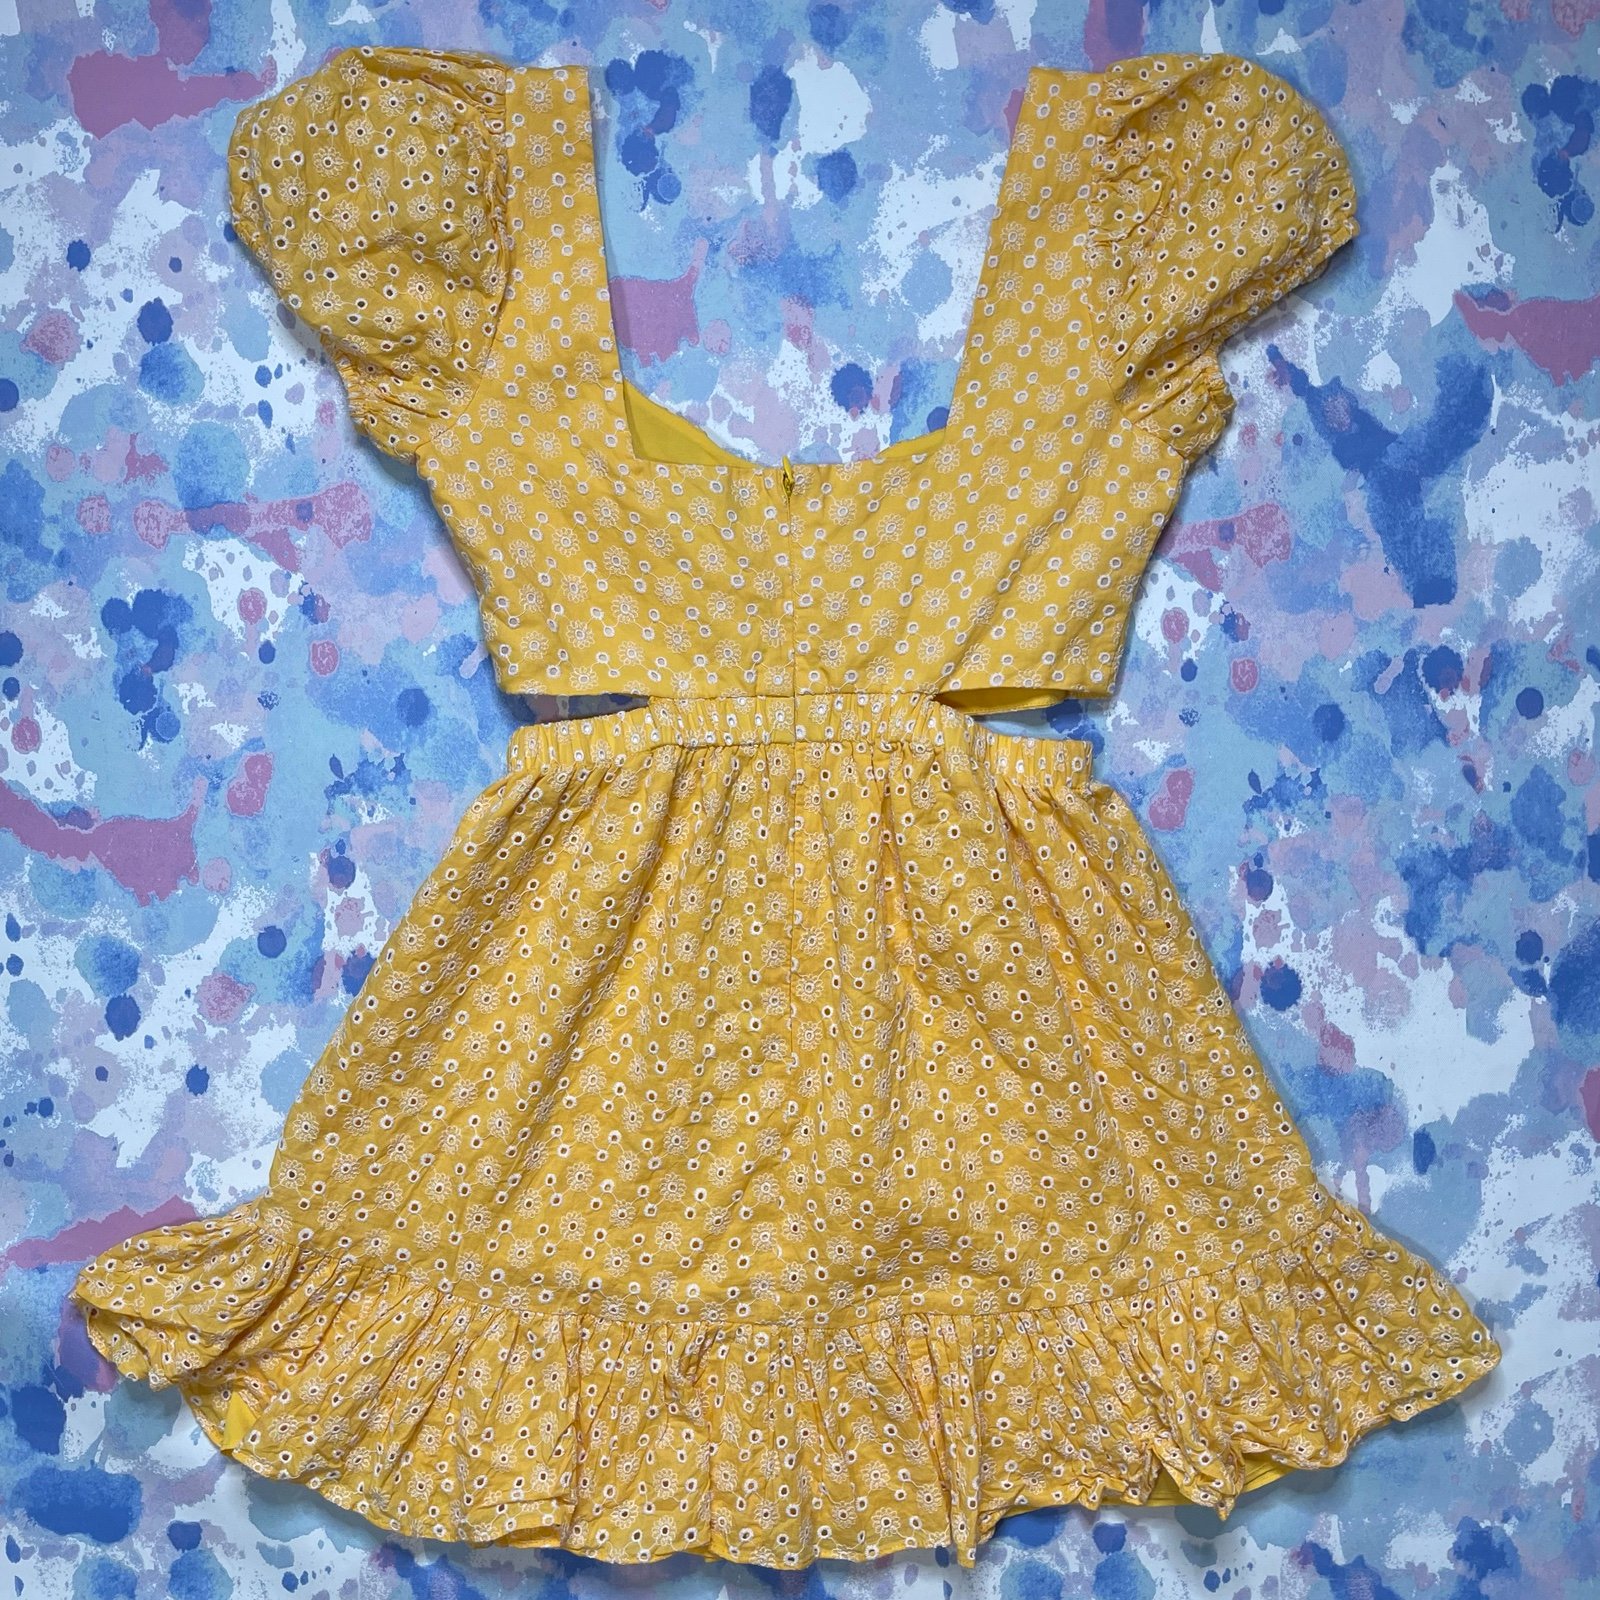 Wholesale price Likely X Revolve Isabella Yellow Dress Women’s Size 4 iEMKg1XbT outlet online shop